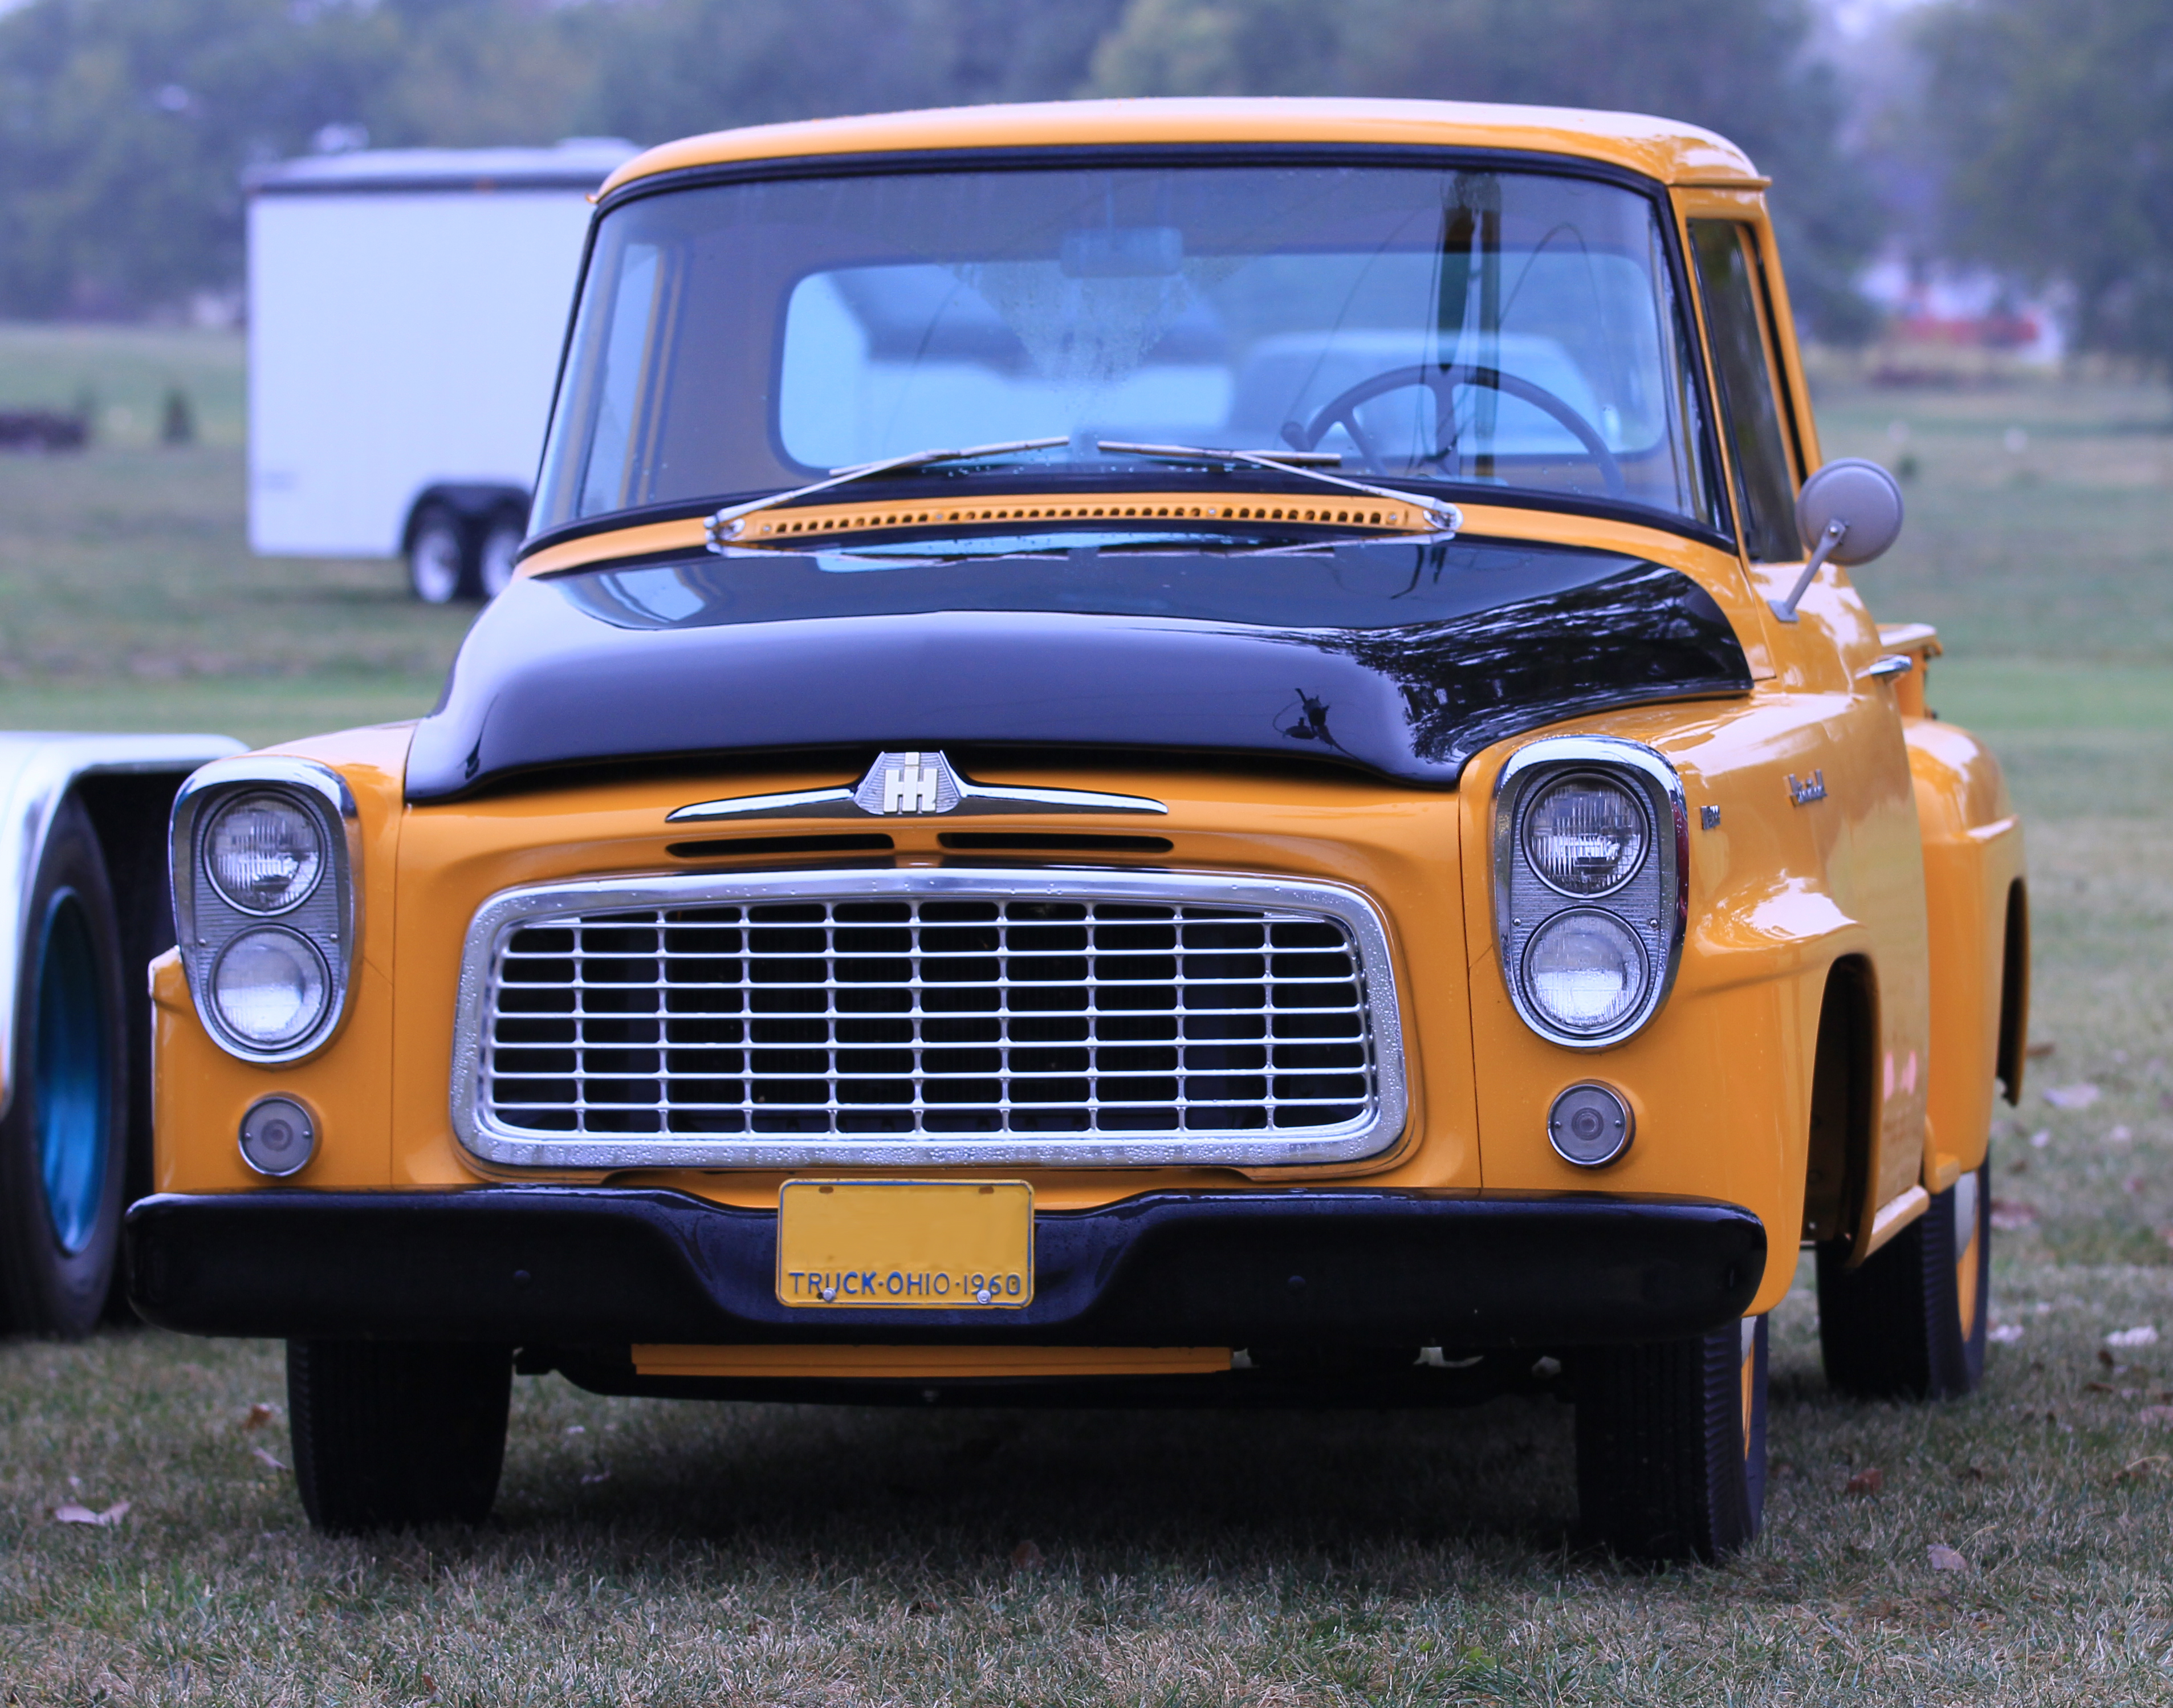 International Harvester B-110 Photo Gallery: Photo #01 out of 8 ...